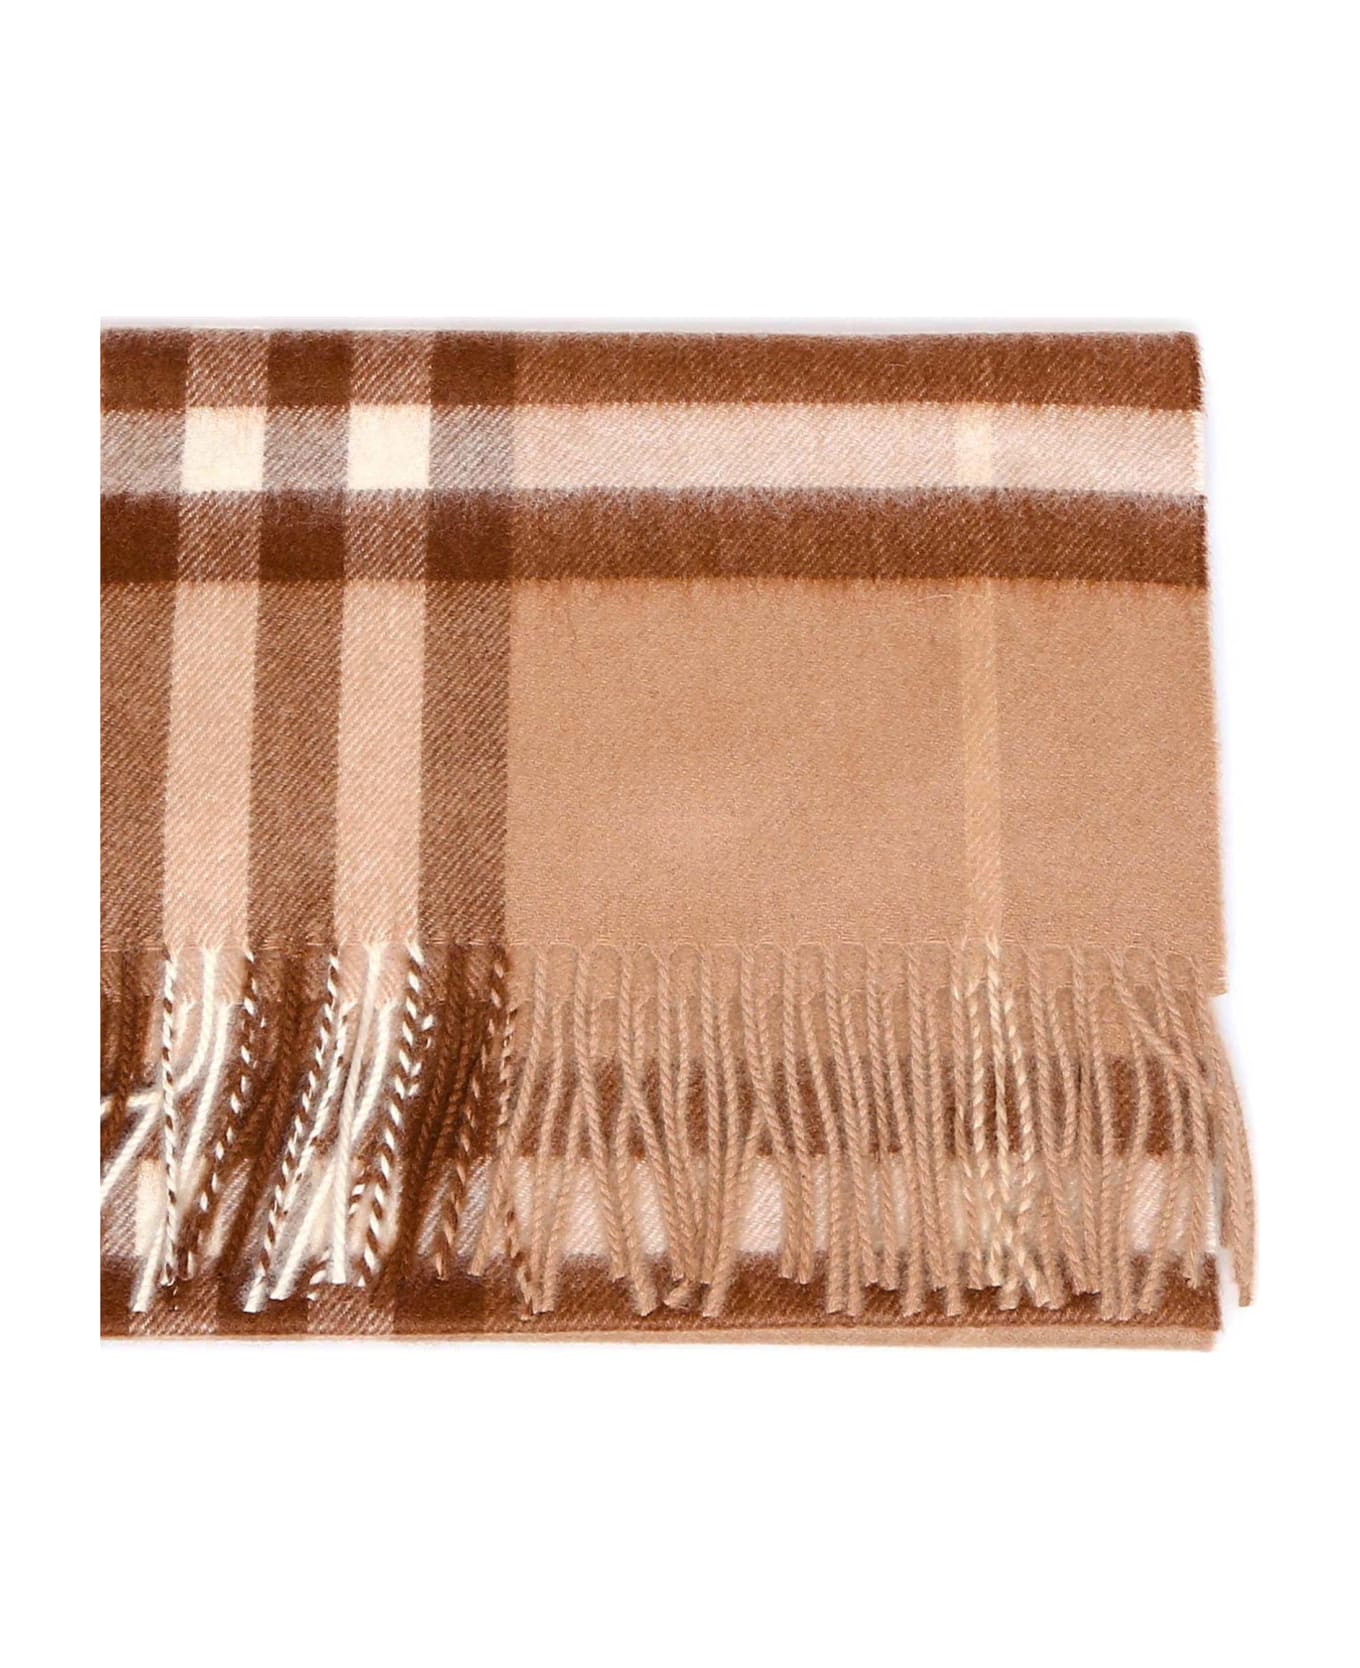 Burberry The Classic Check Scarf - Brown